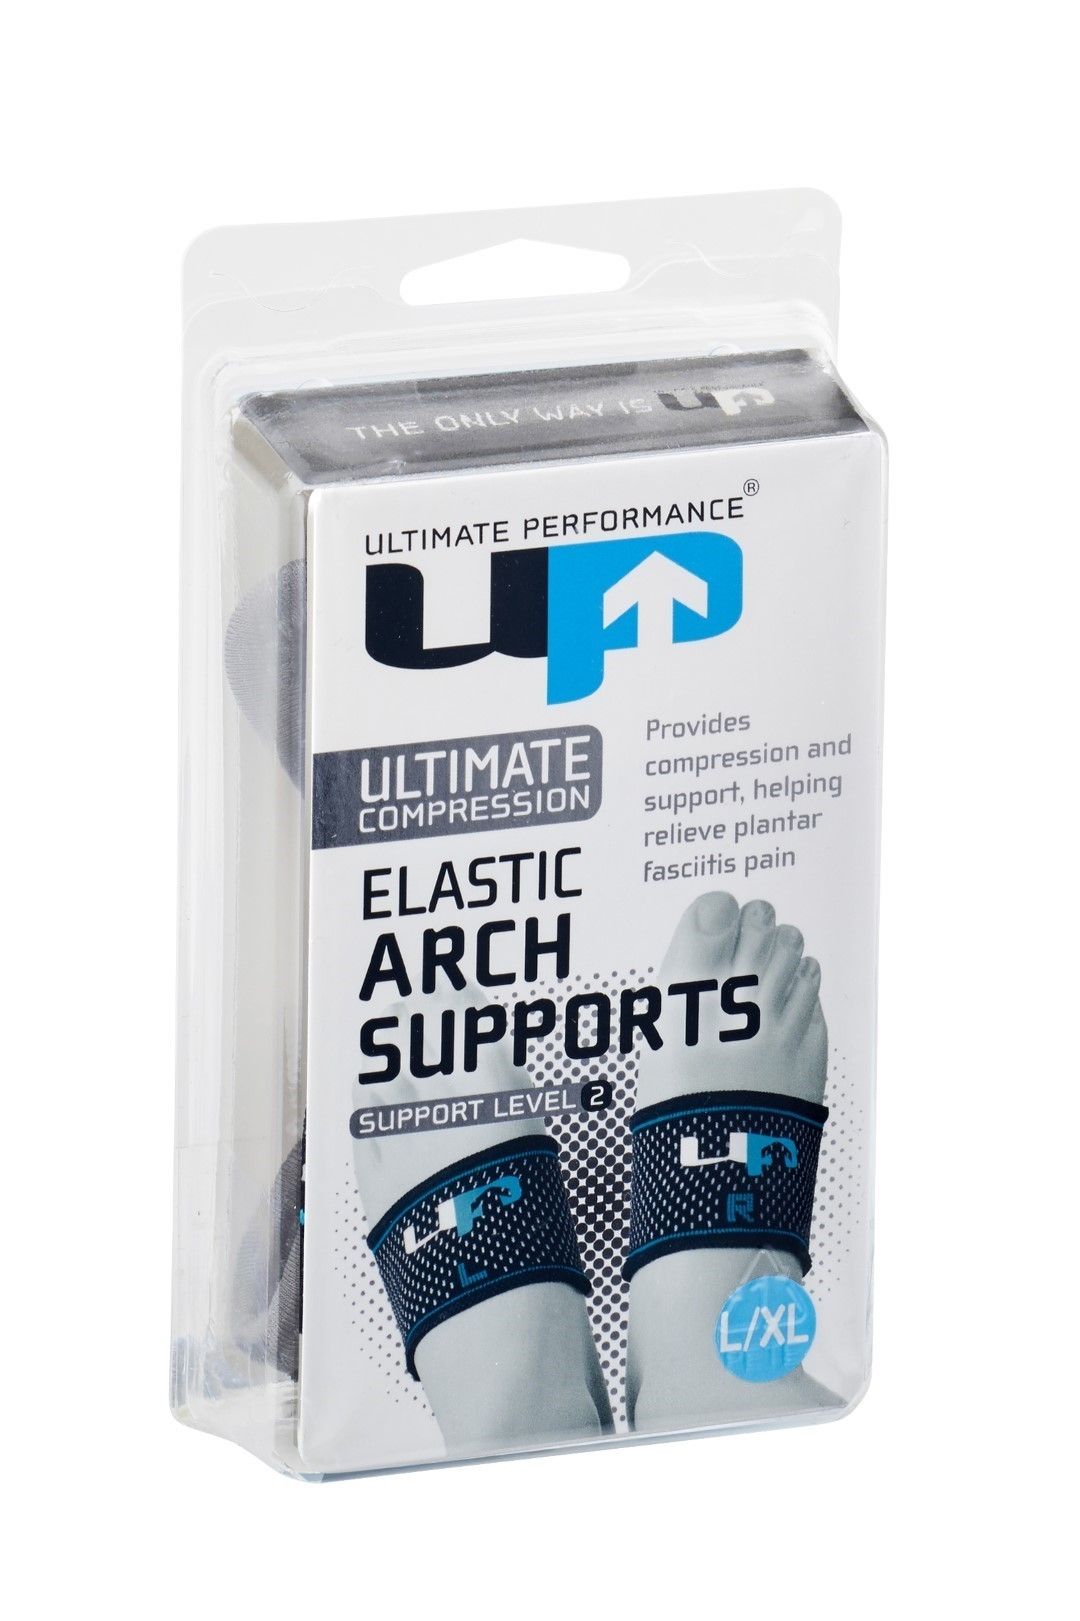 ULTIMATE PERFORMANCE ULTIMATE COMPRESSION ELASTIC ARCH SUPPORT photo